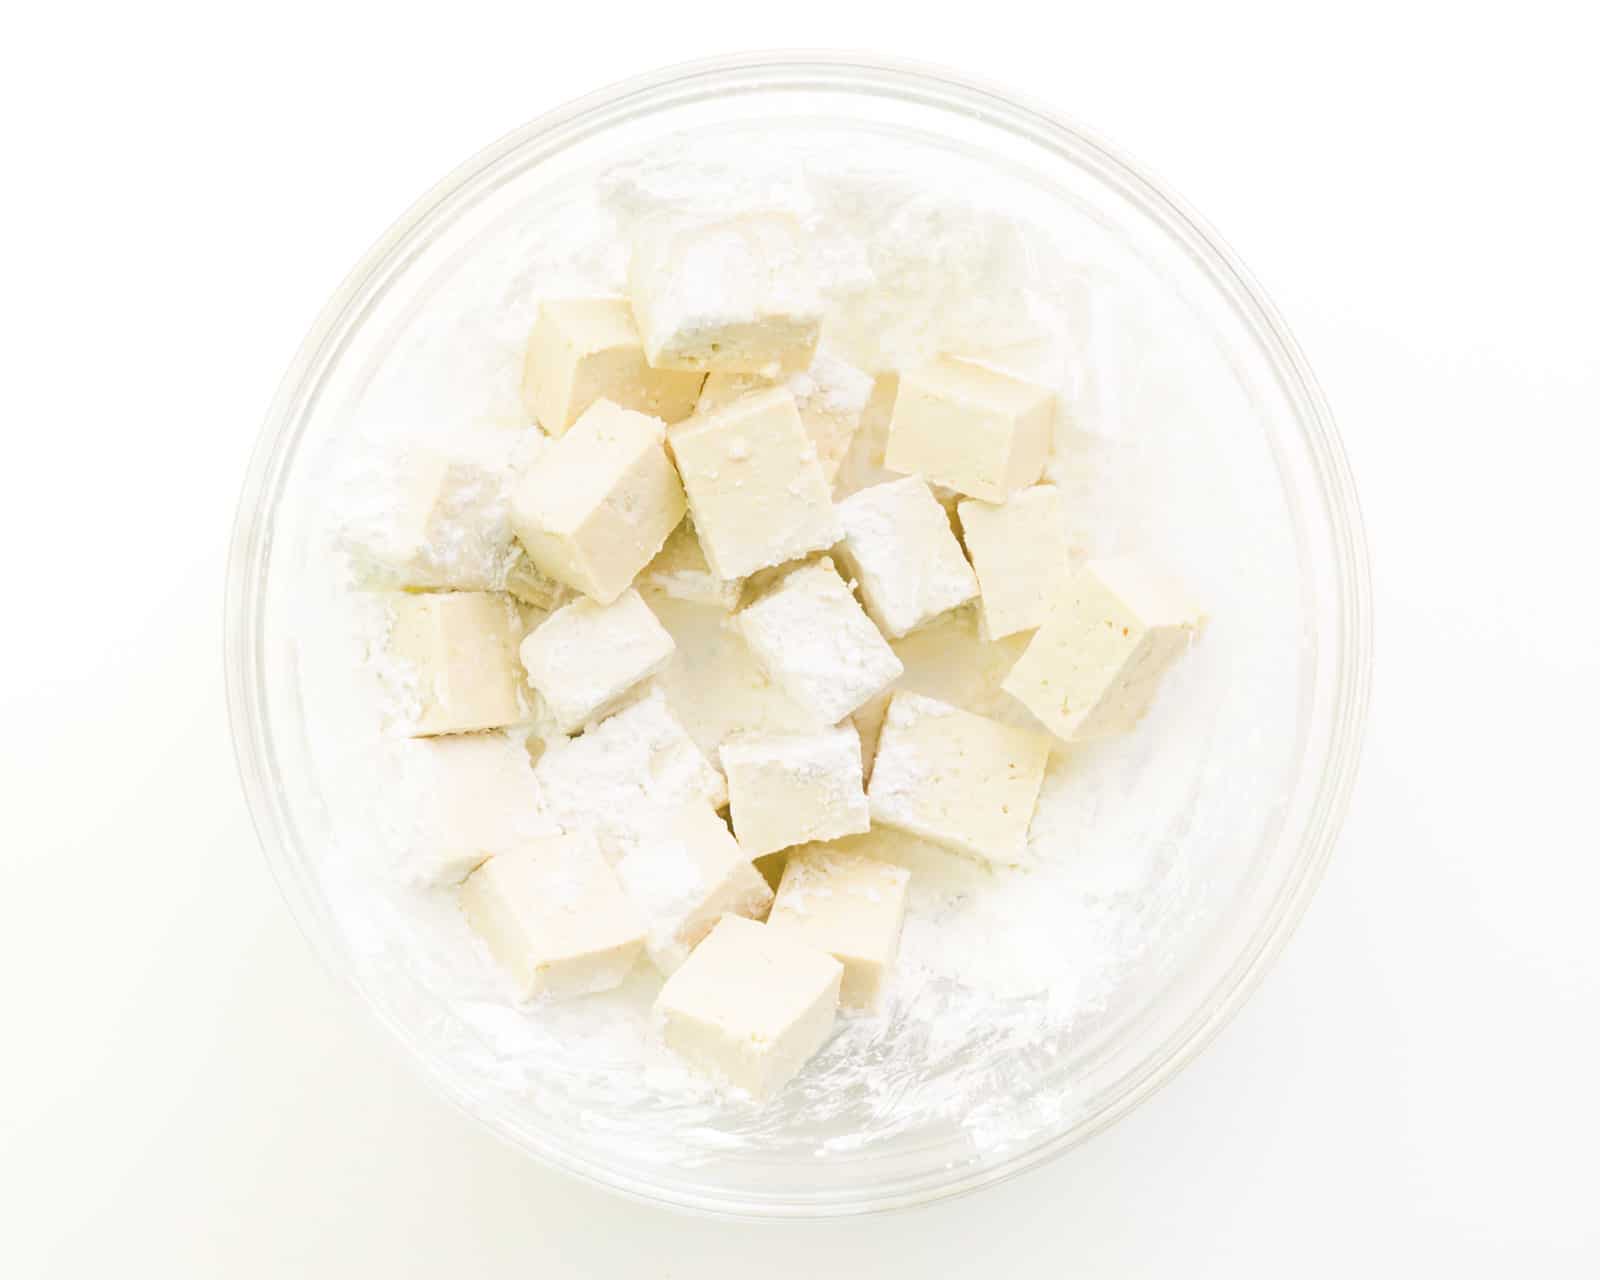 Tofu cubes are surrounded by a cornstarch mixture in the bottom of a bowl.